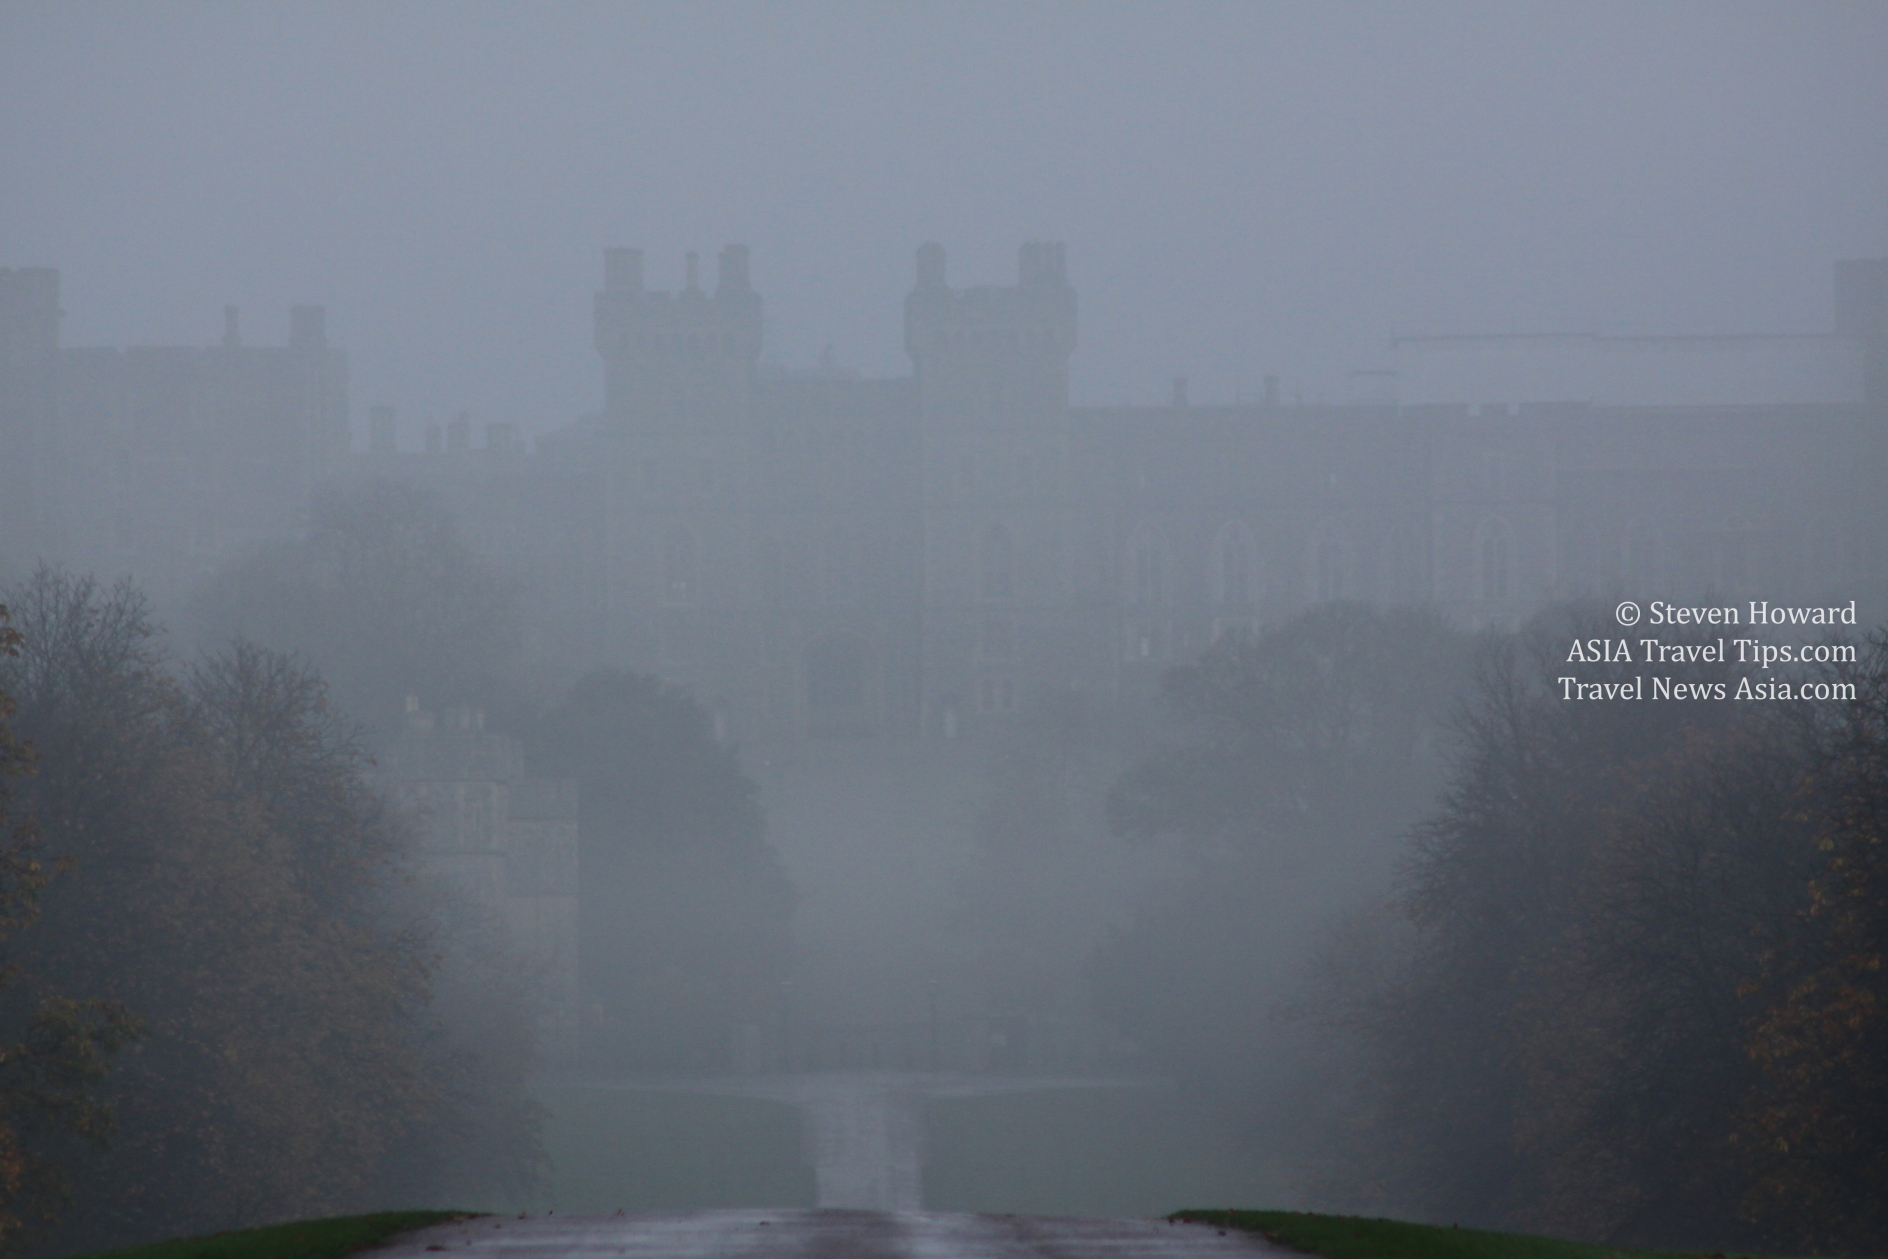 Windsor Castle in England shrouded in fog. Picture by Steven Howard of TravelNewsAsia.com Click to enlarge.